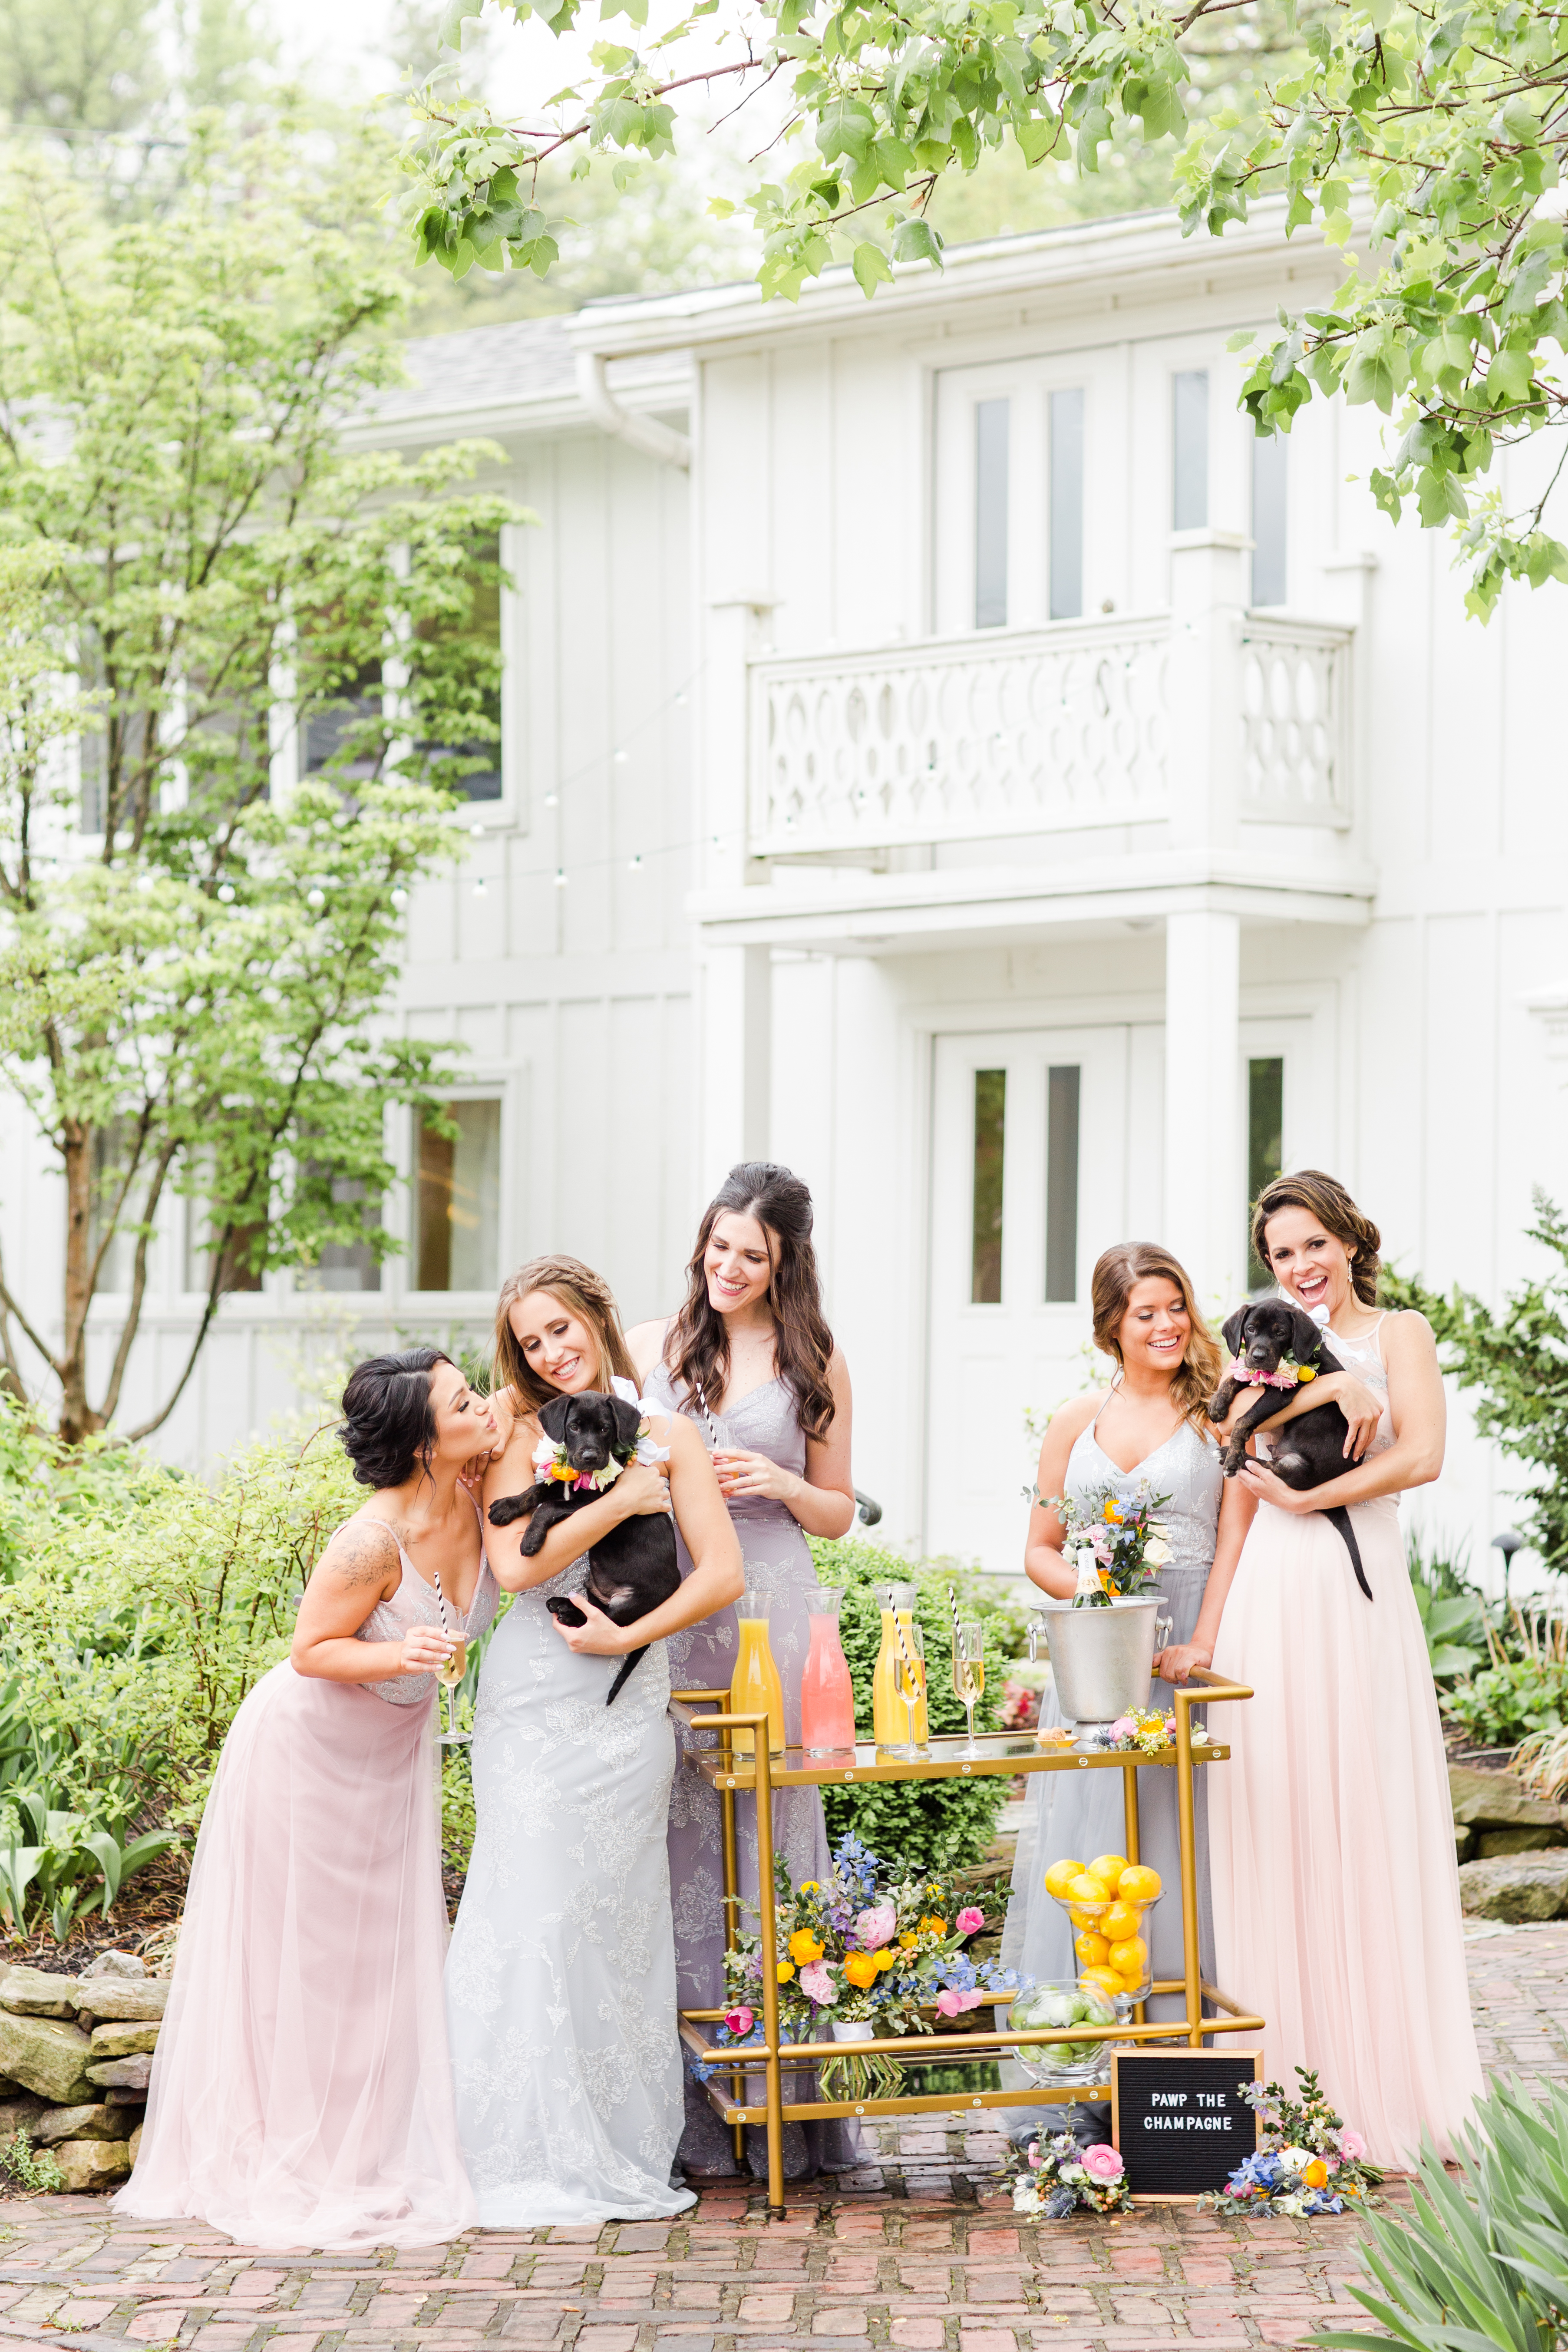 Puppy Love Styled shoot at House of White Bridal in Newburgh Indiana featuring dogs from the Warrick Humane Society and flowers from Emerald Design